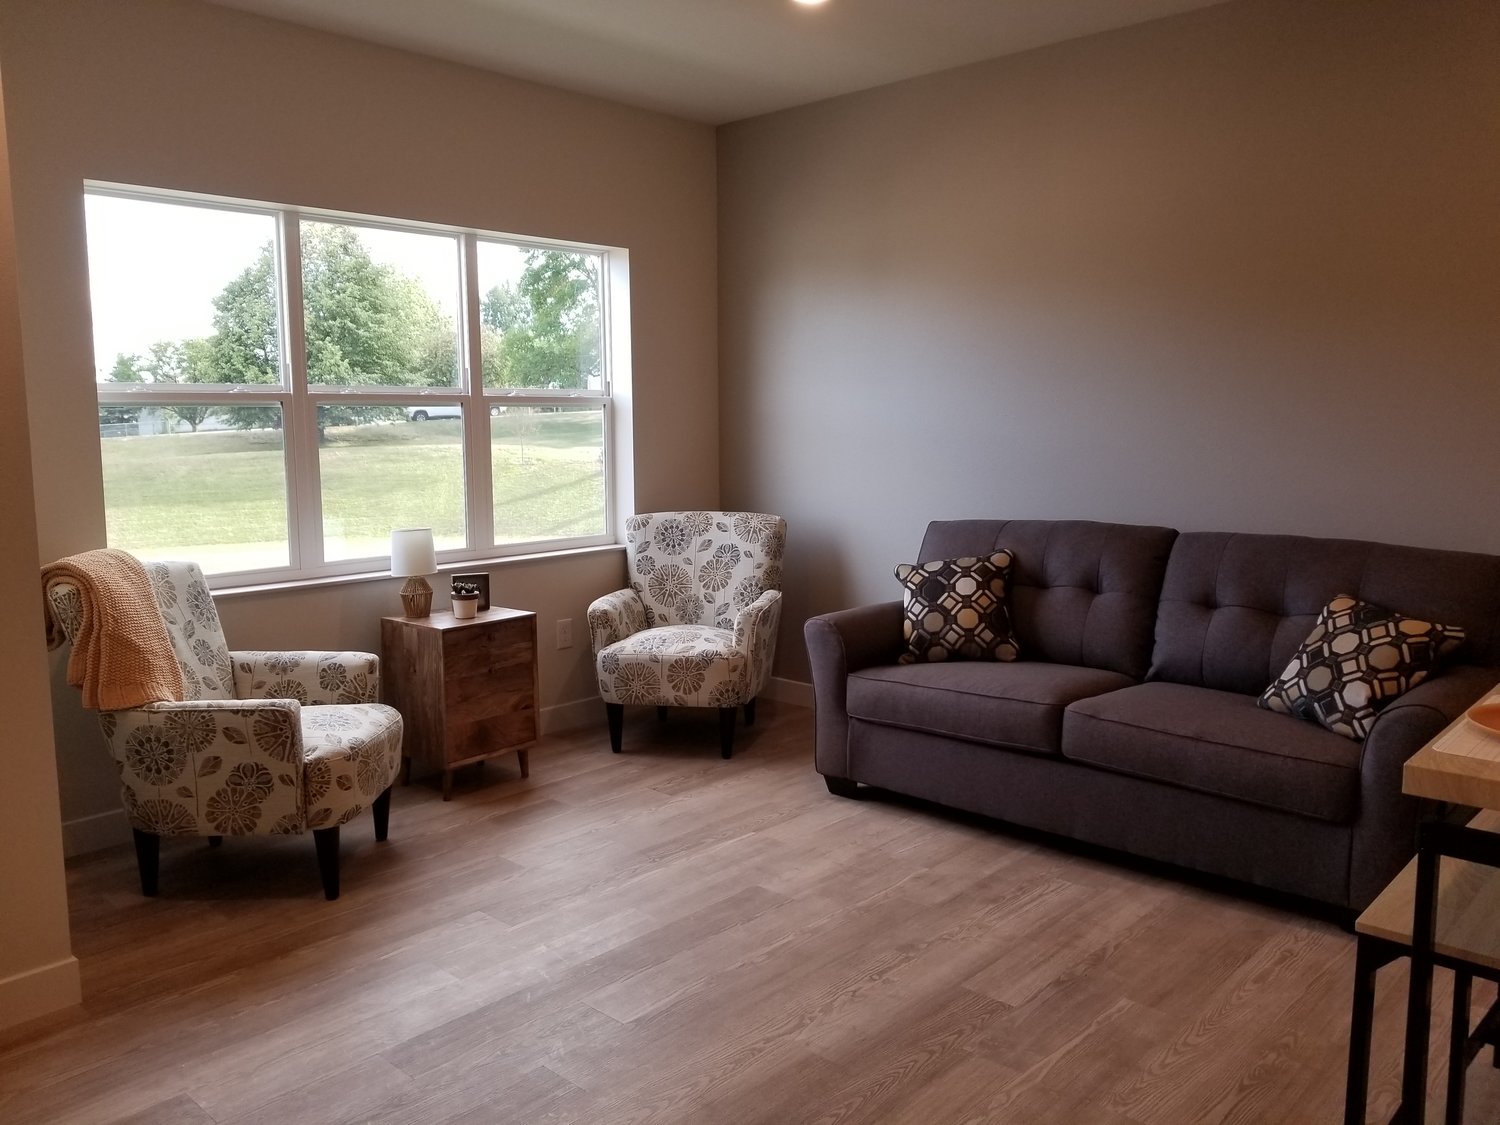 A staged living area of an apartment in the new Goodhue Living Senior Community.